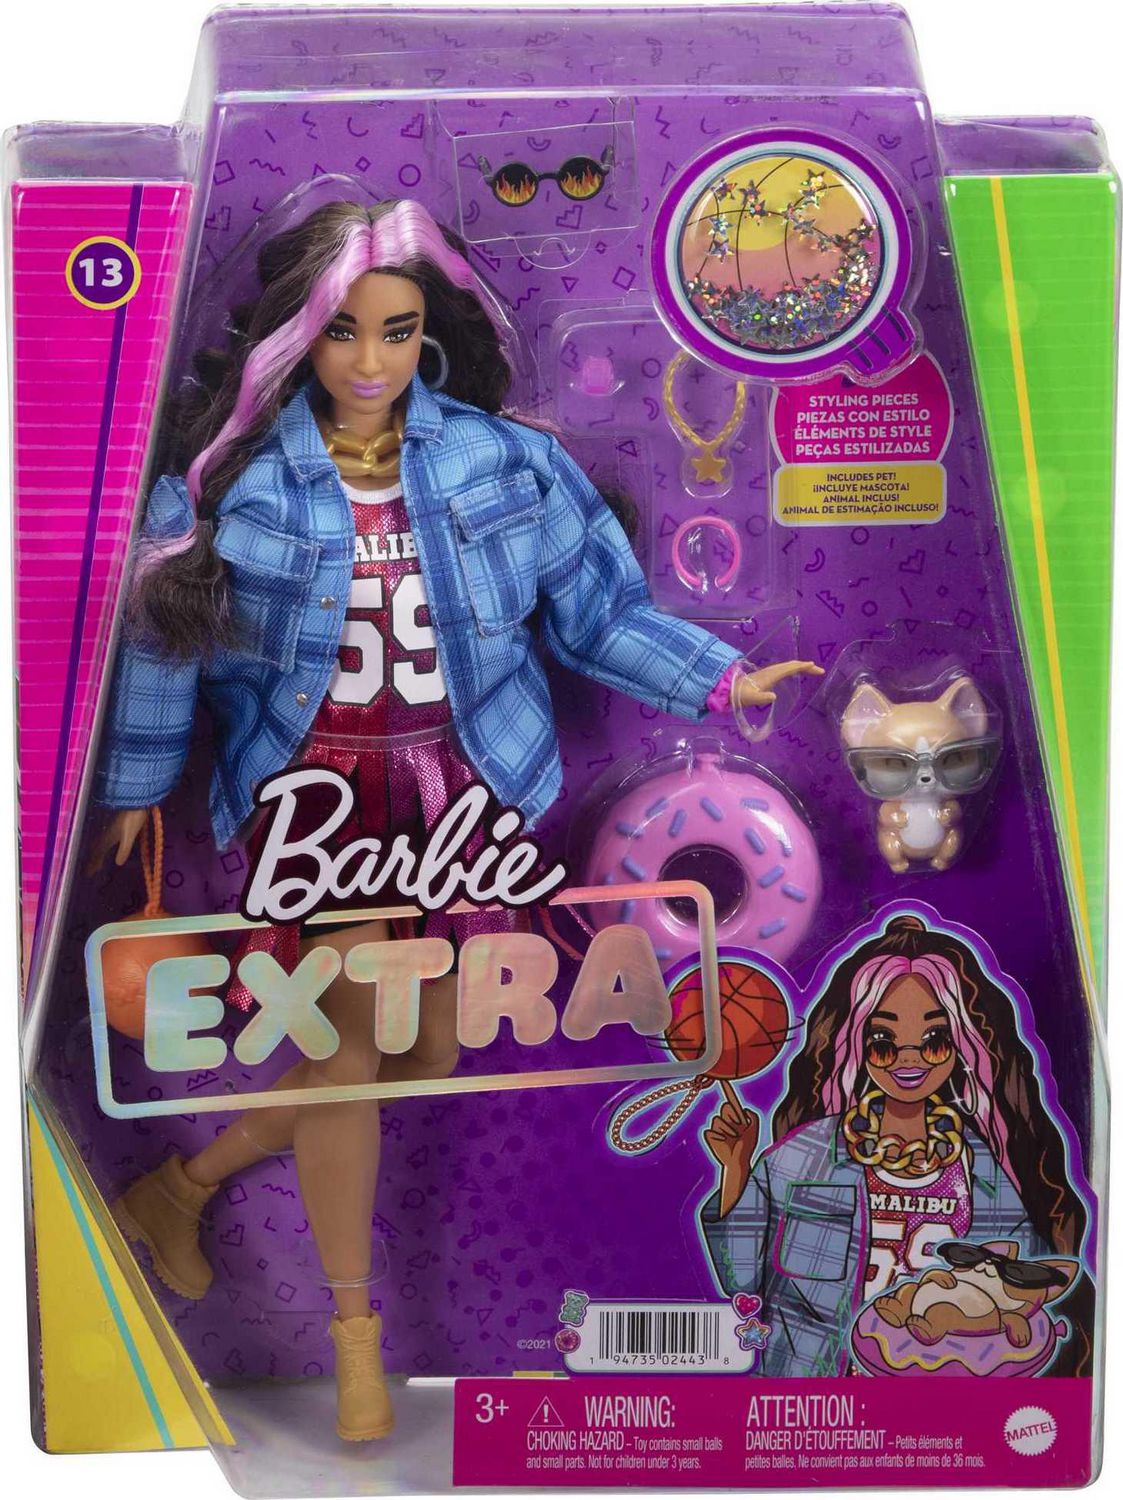 Barbie Extra Doll #13 in Basketball Jersey Dress & Accessories